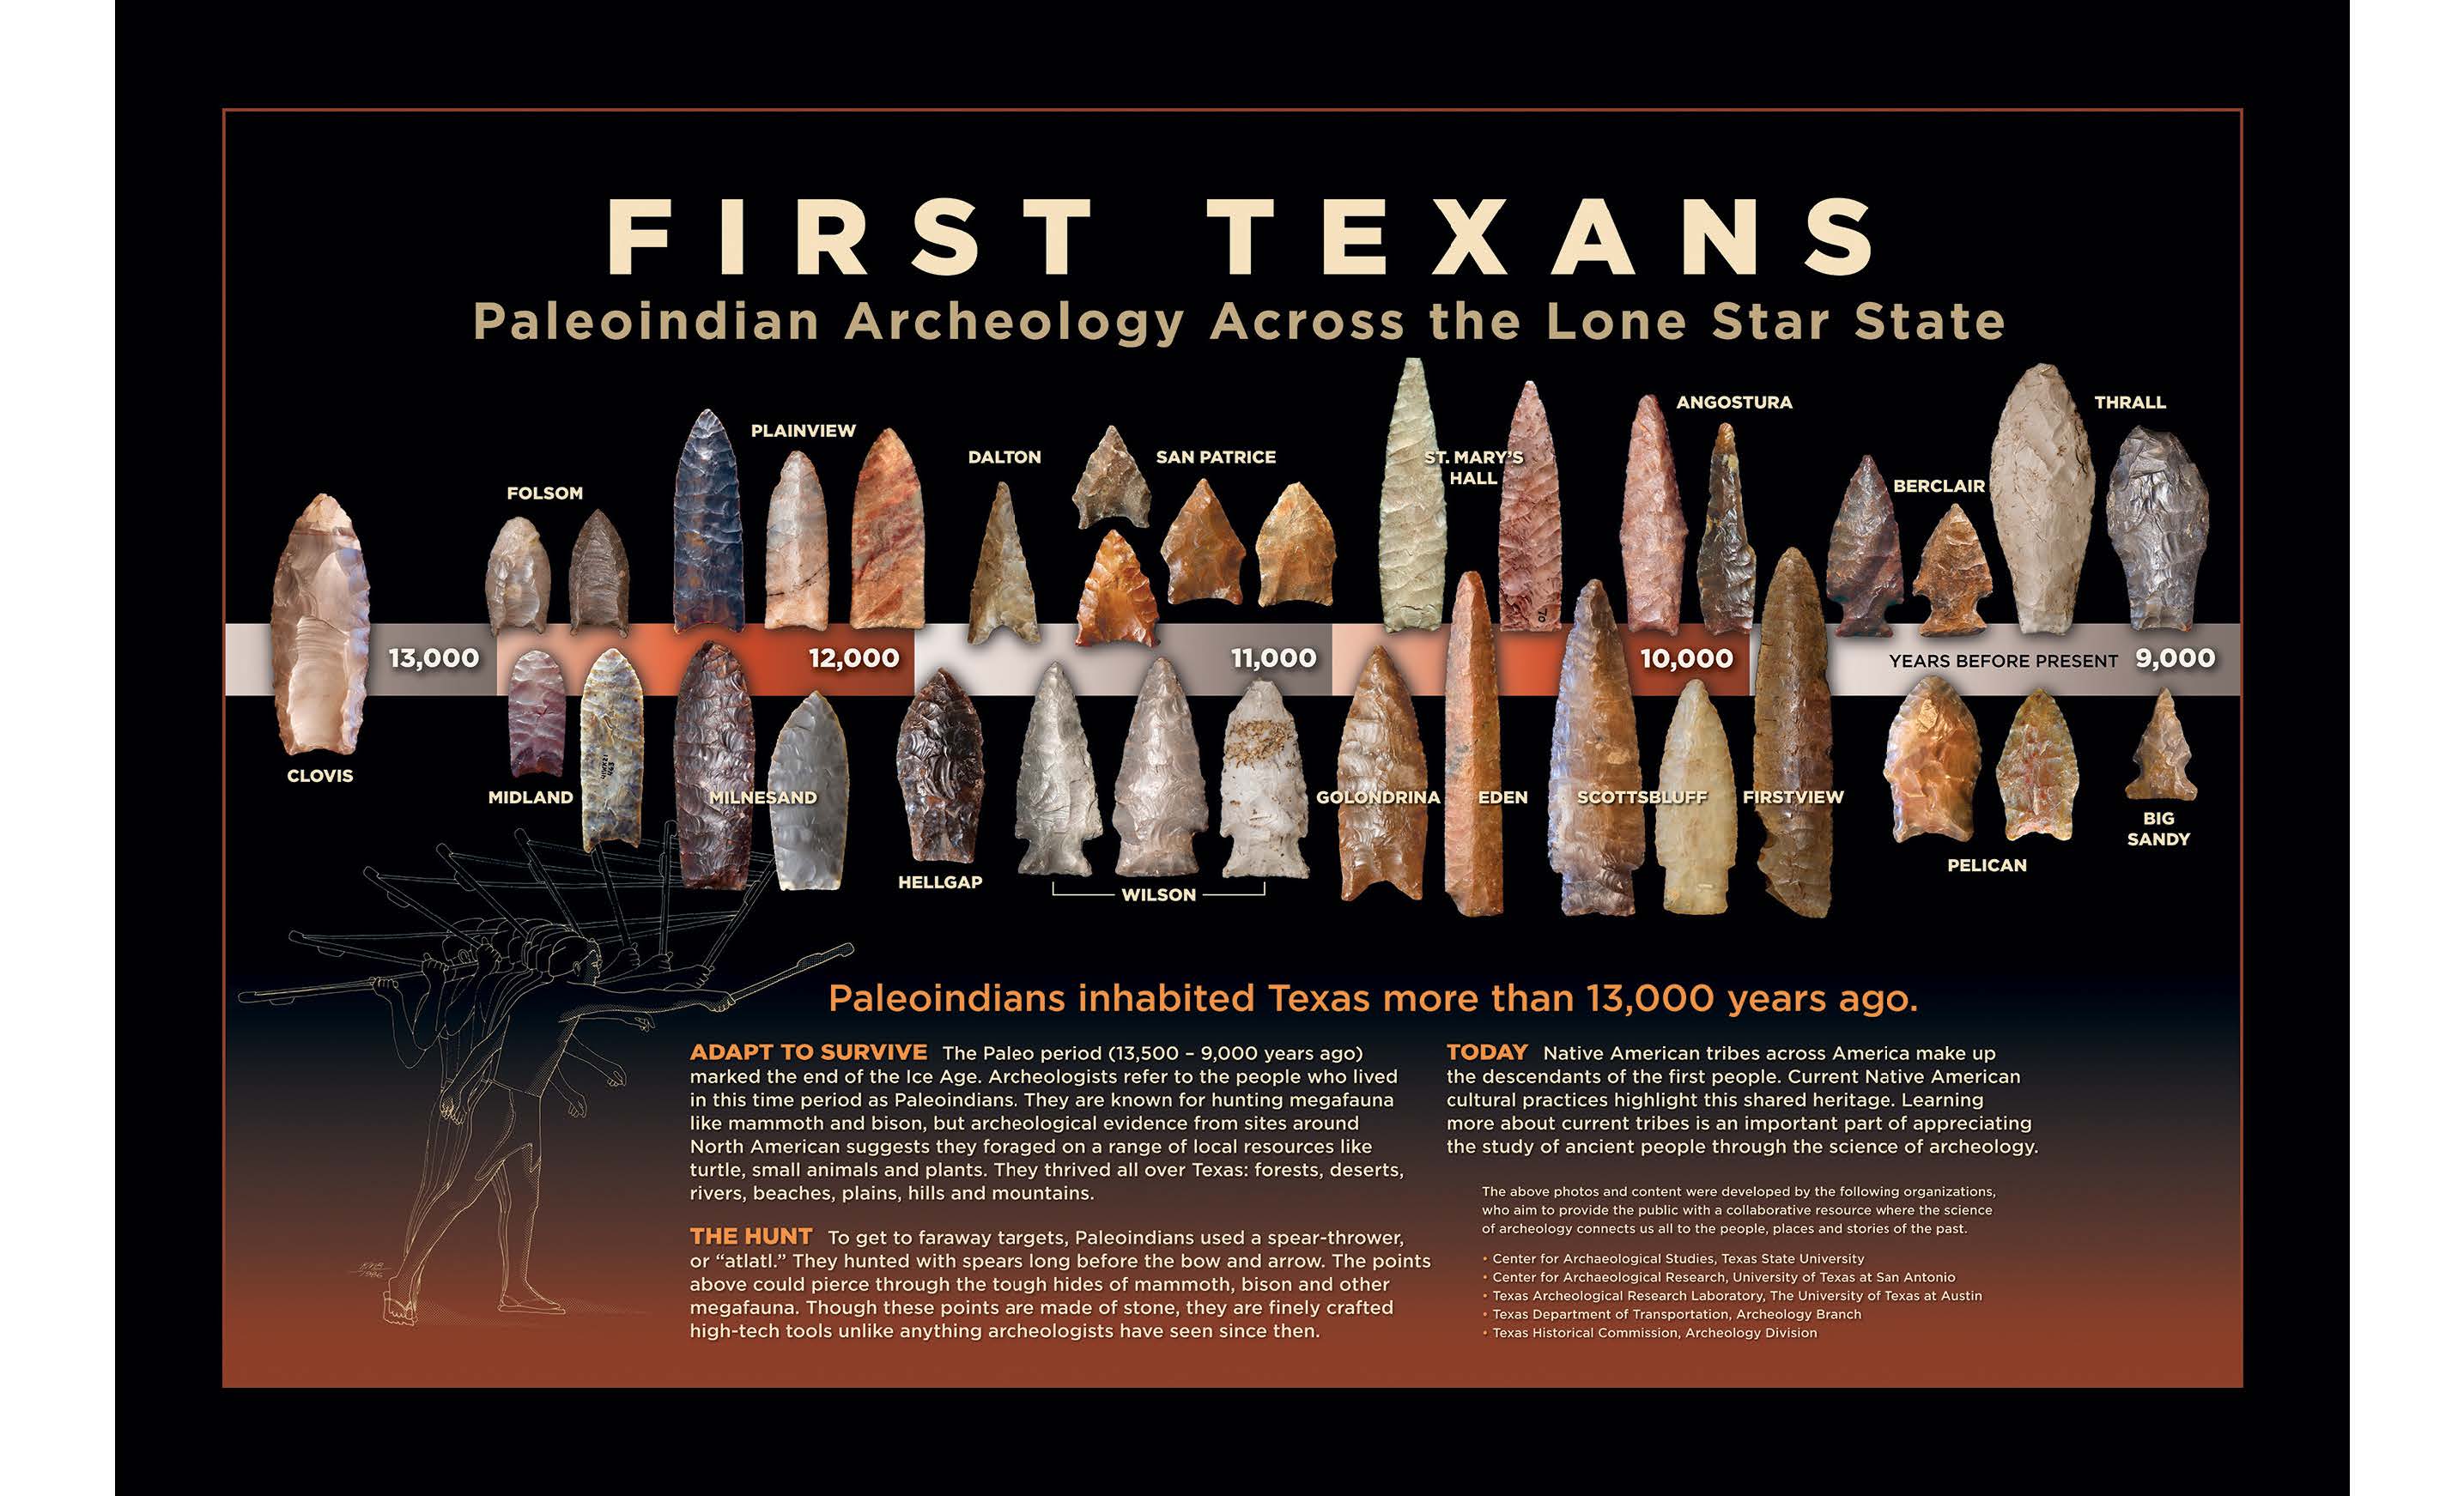 Poster of paleoindian projectile points arranged chronologically in timeline with dates and descriotions